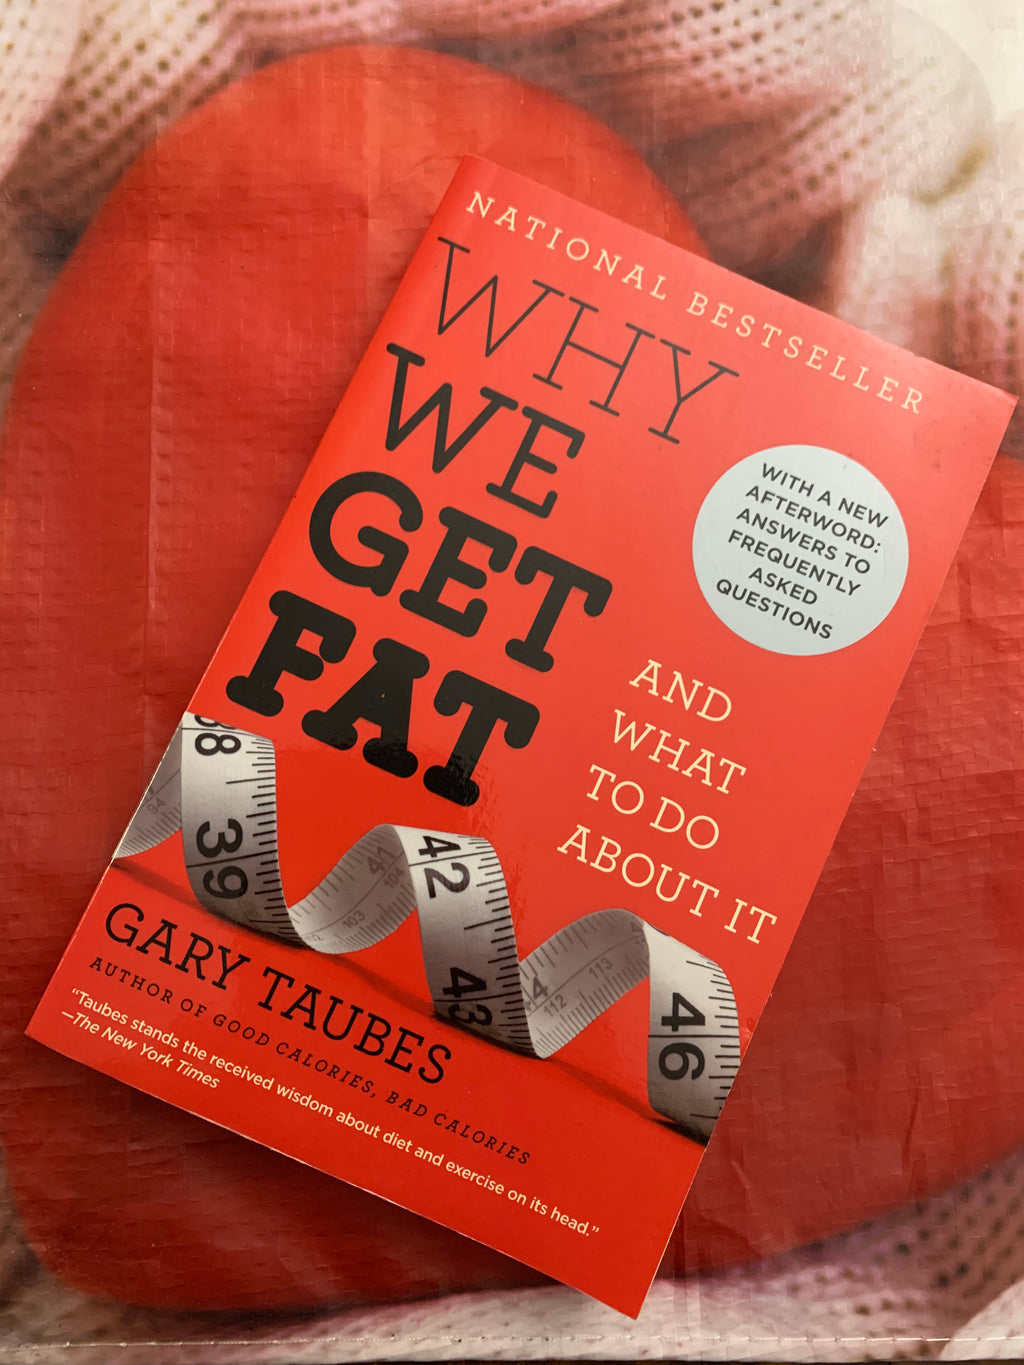 Why We Get Fat and What to Do About It- By Gary Taubes